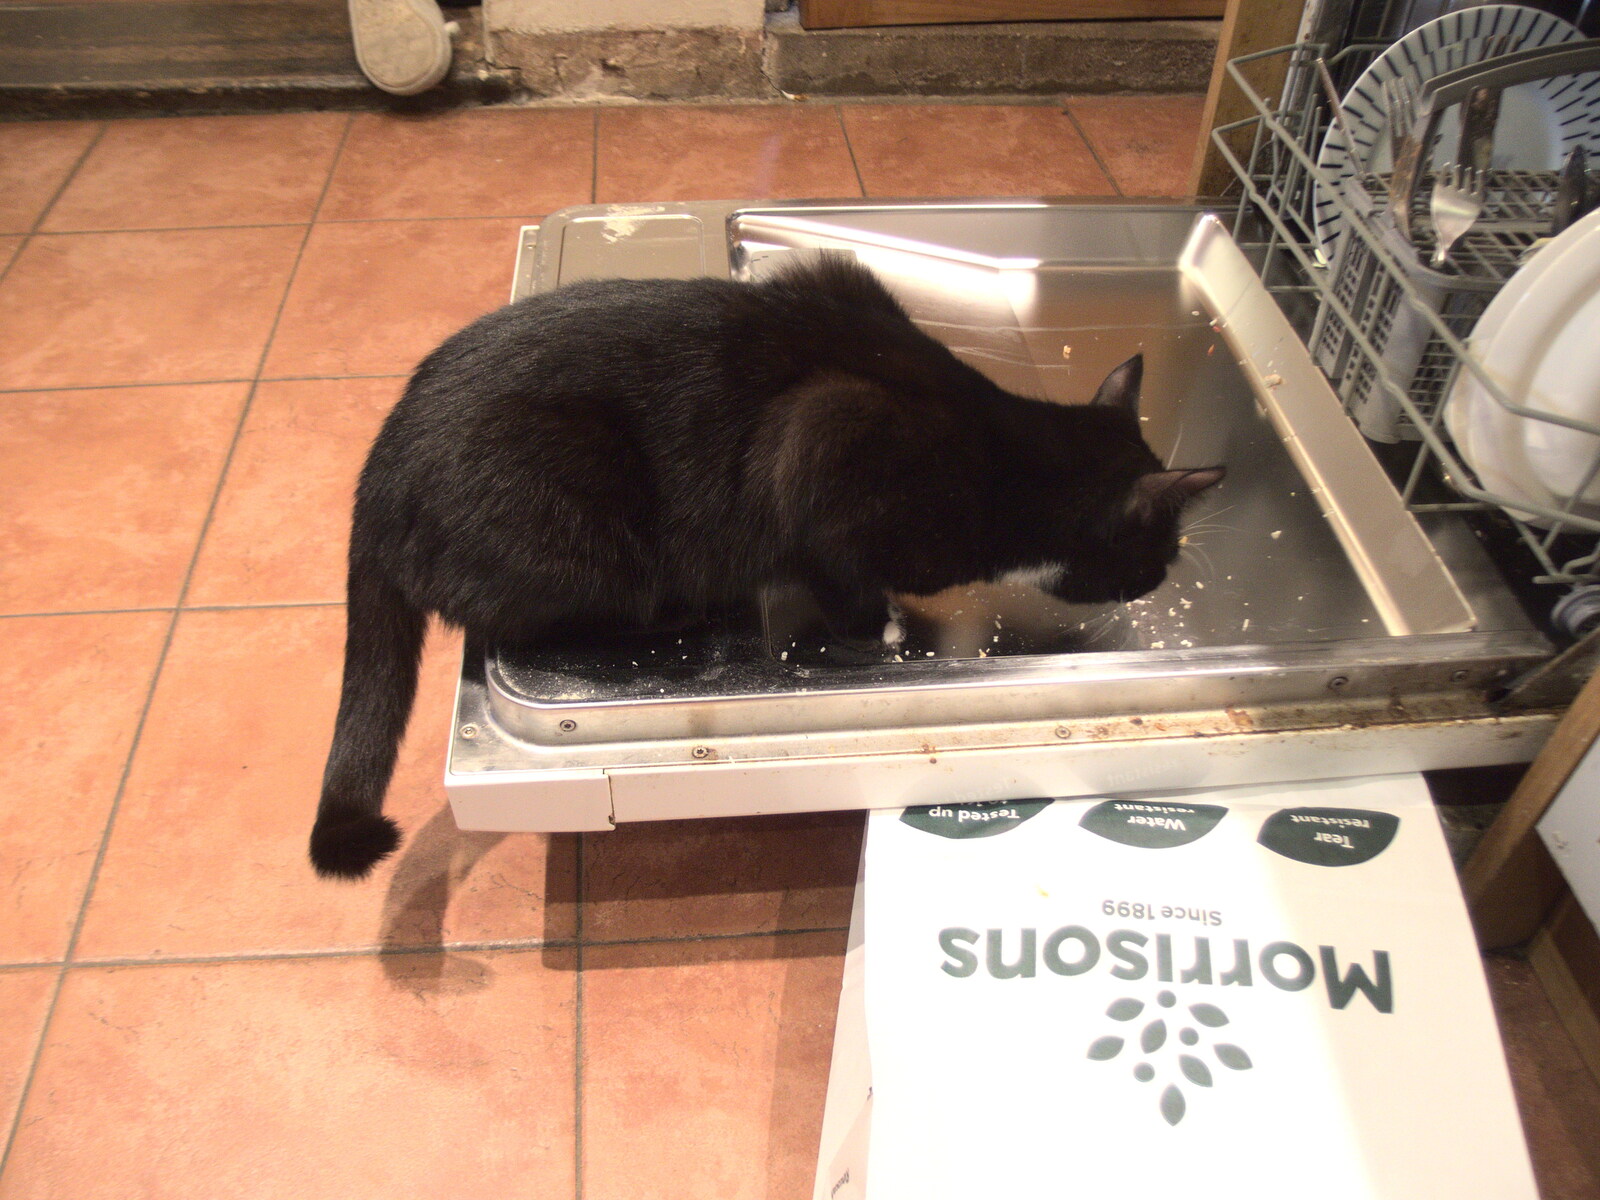 A Camper-Van Trip, West Harling, Norfolk - 13th April 2022: Molly Cat tries out the dishwasher